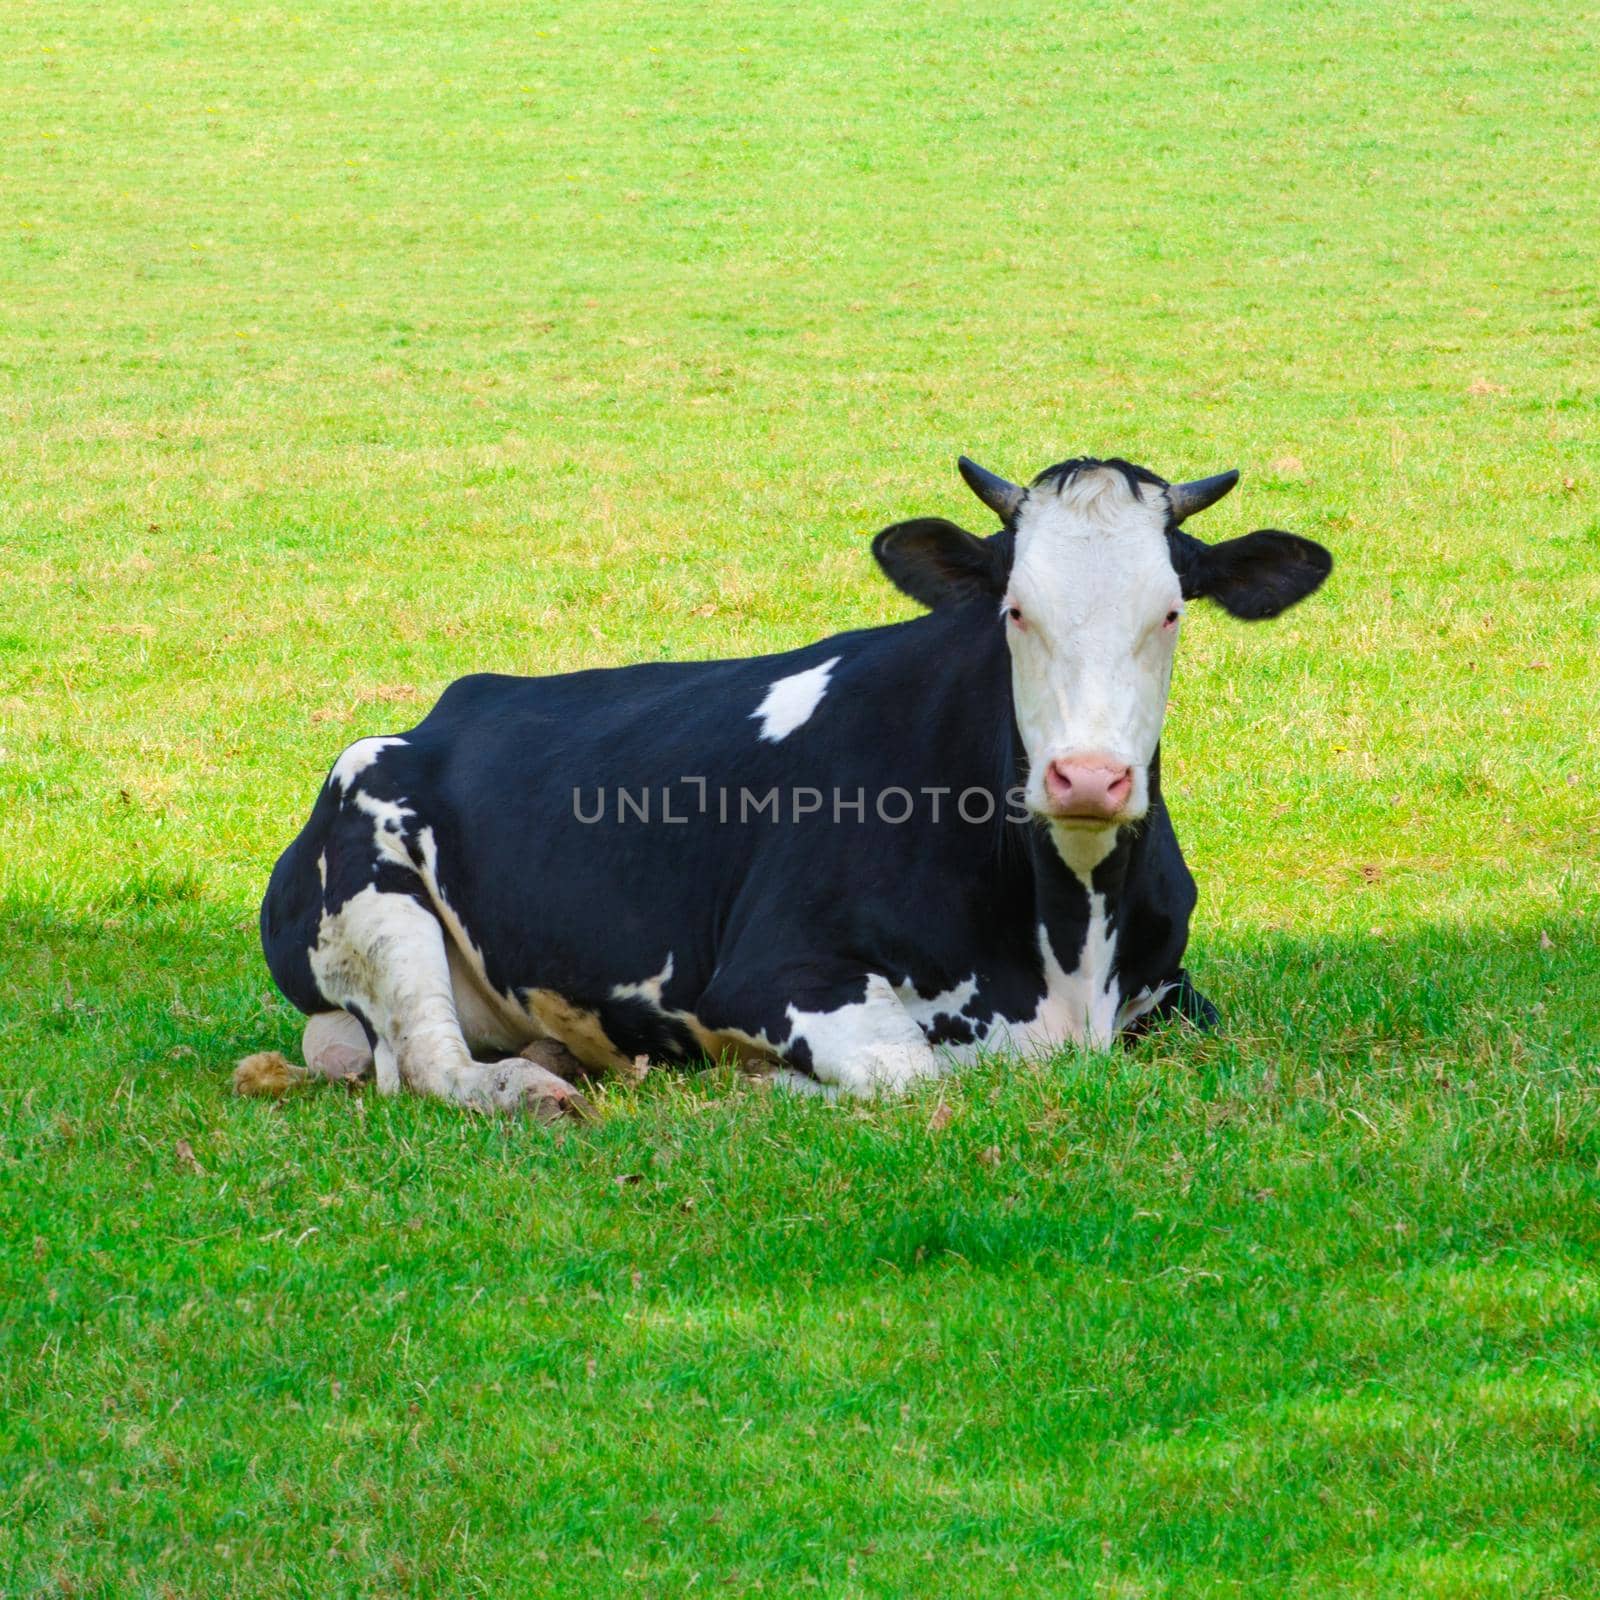 Cow lying down on green grass. Black and white cow. Cattle in a green field. Cow on a summer pasture.